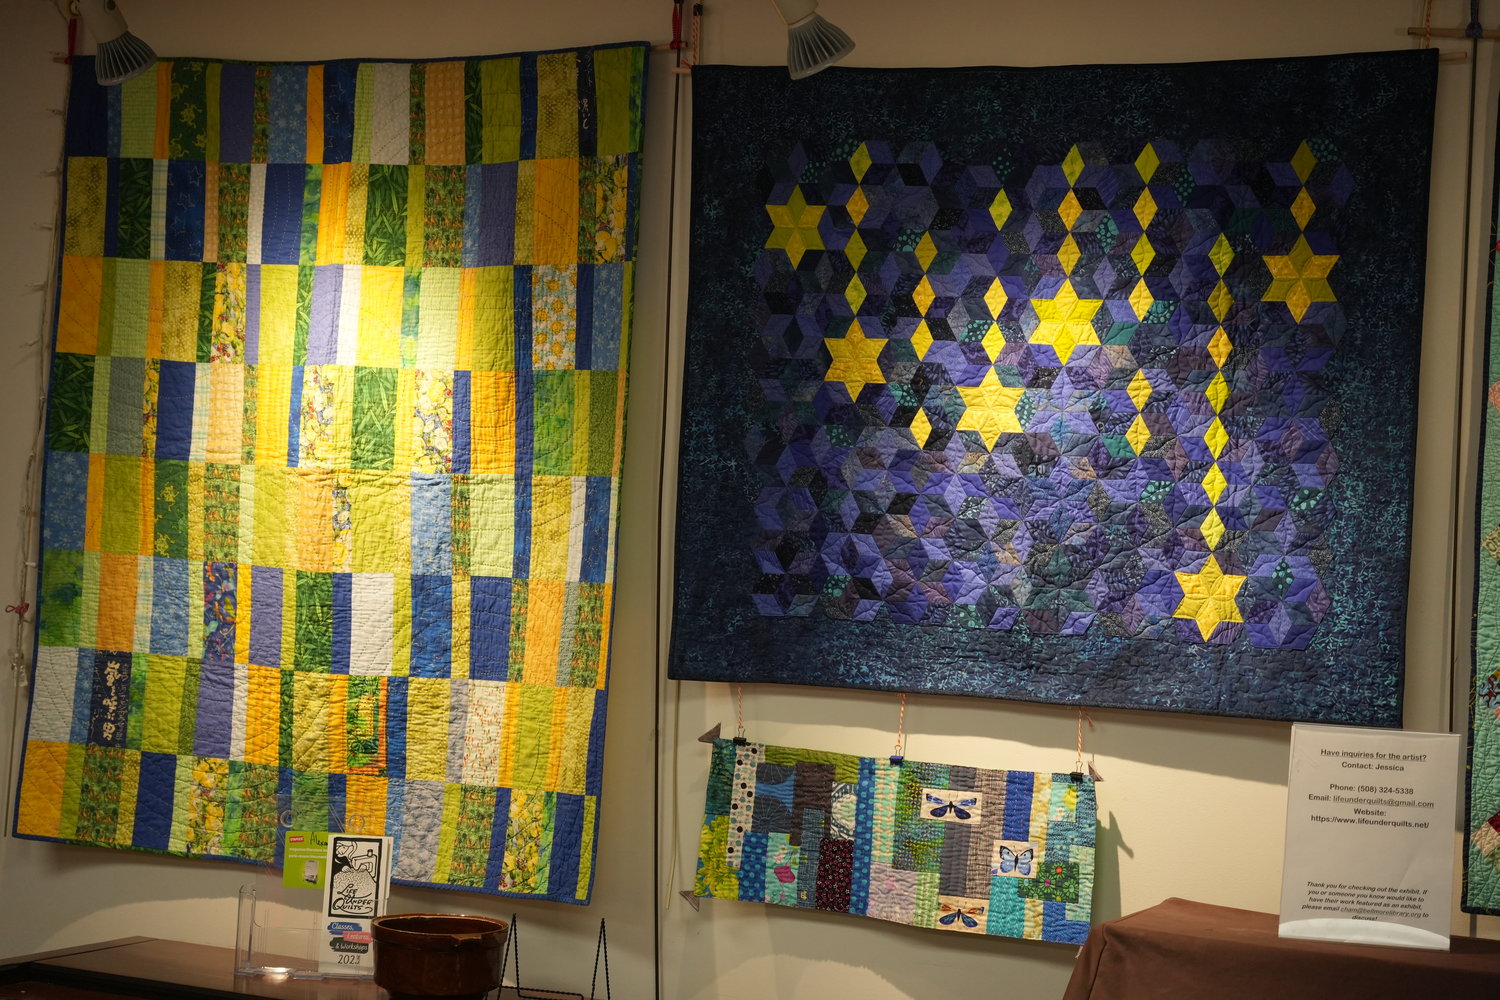 The quilting show is open in the community room of the library through the end of April. Below, some of Alexandrakis’ creations.